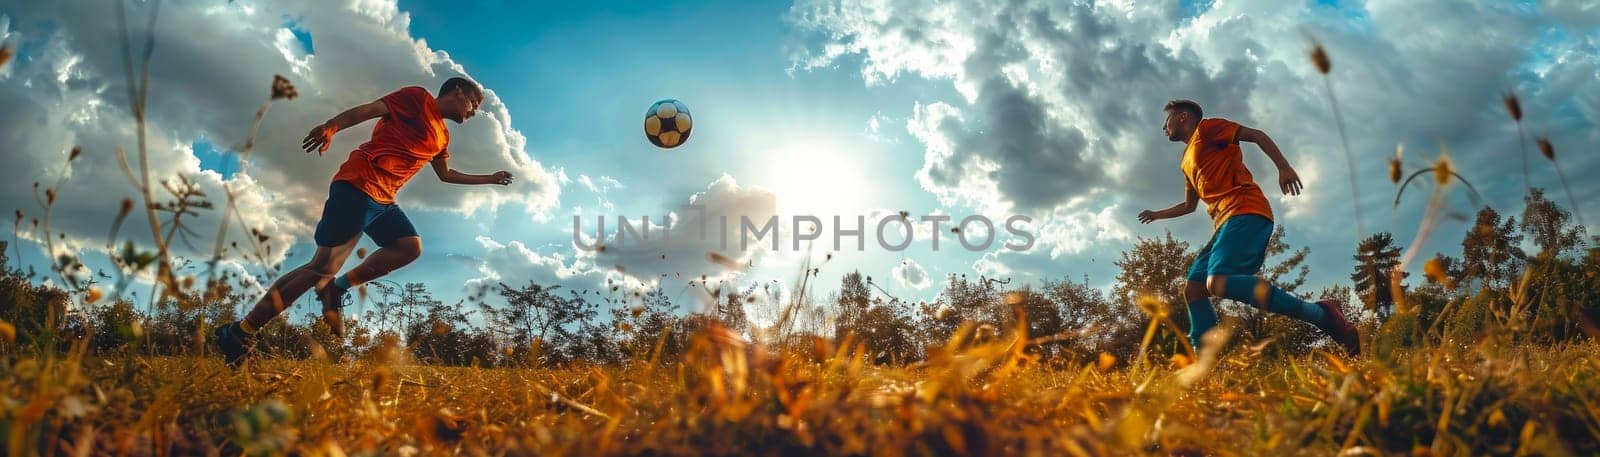 Two soccer players are playing in a field with a soccer ball in the air by itchaznong